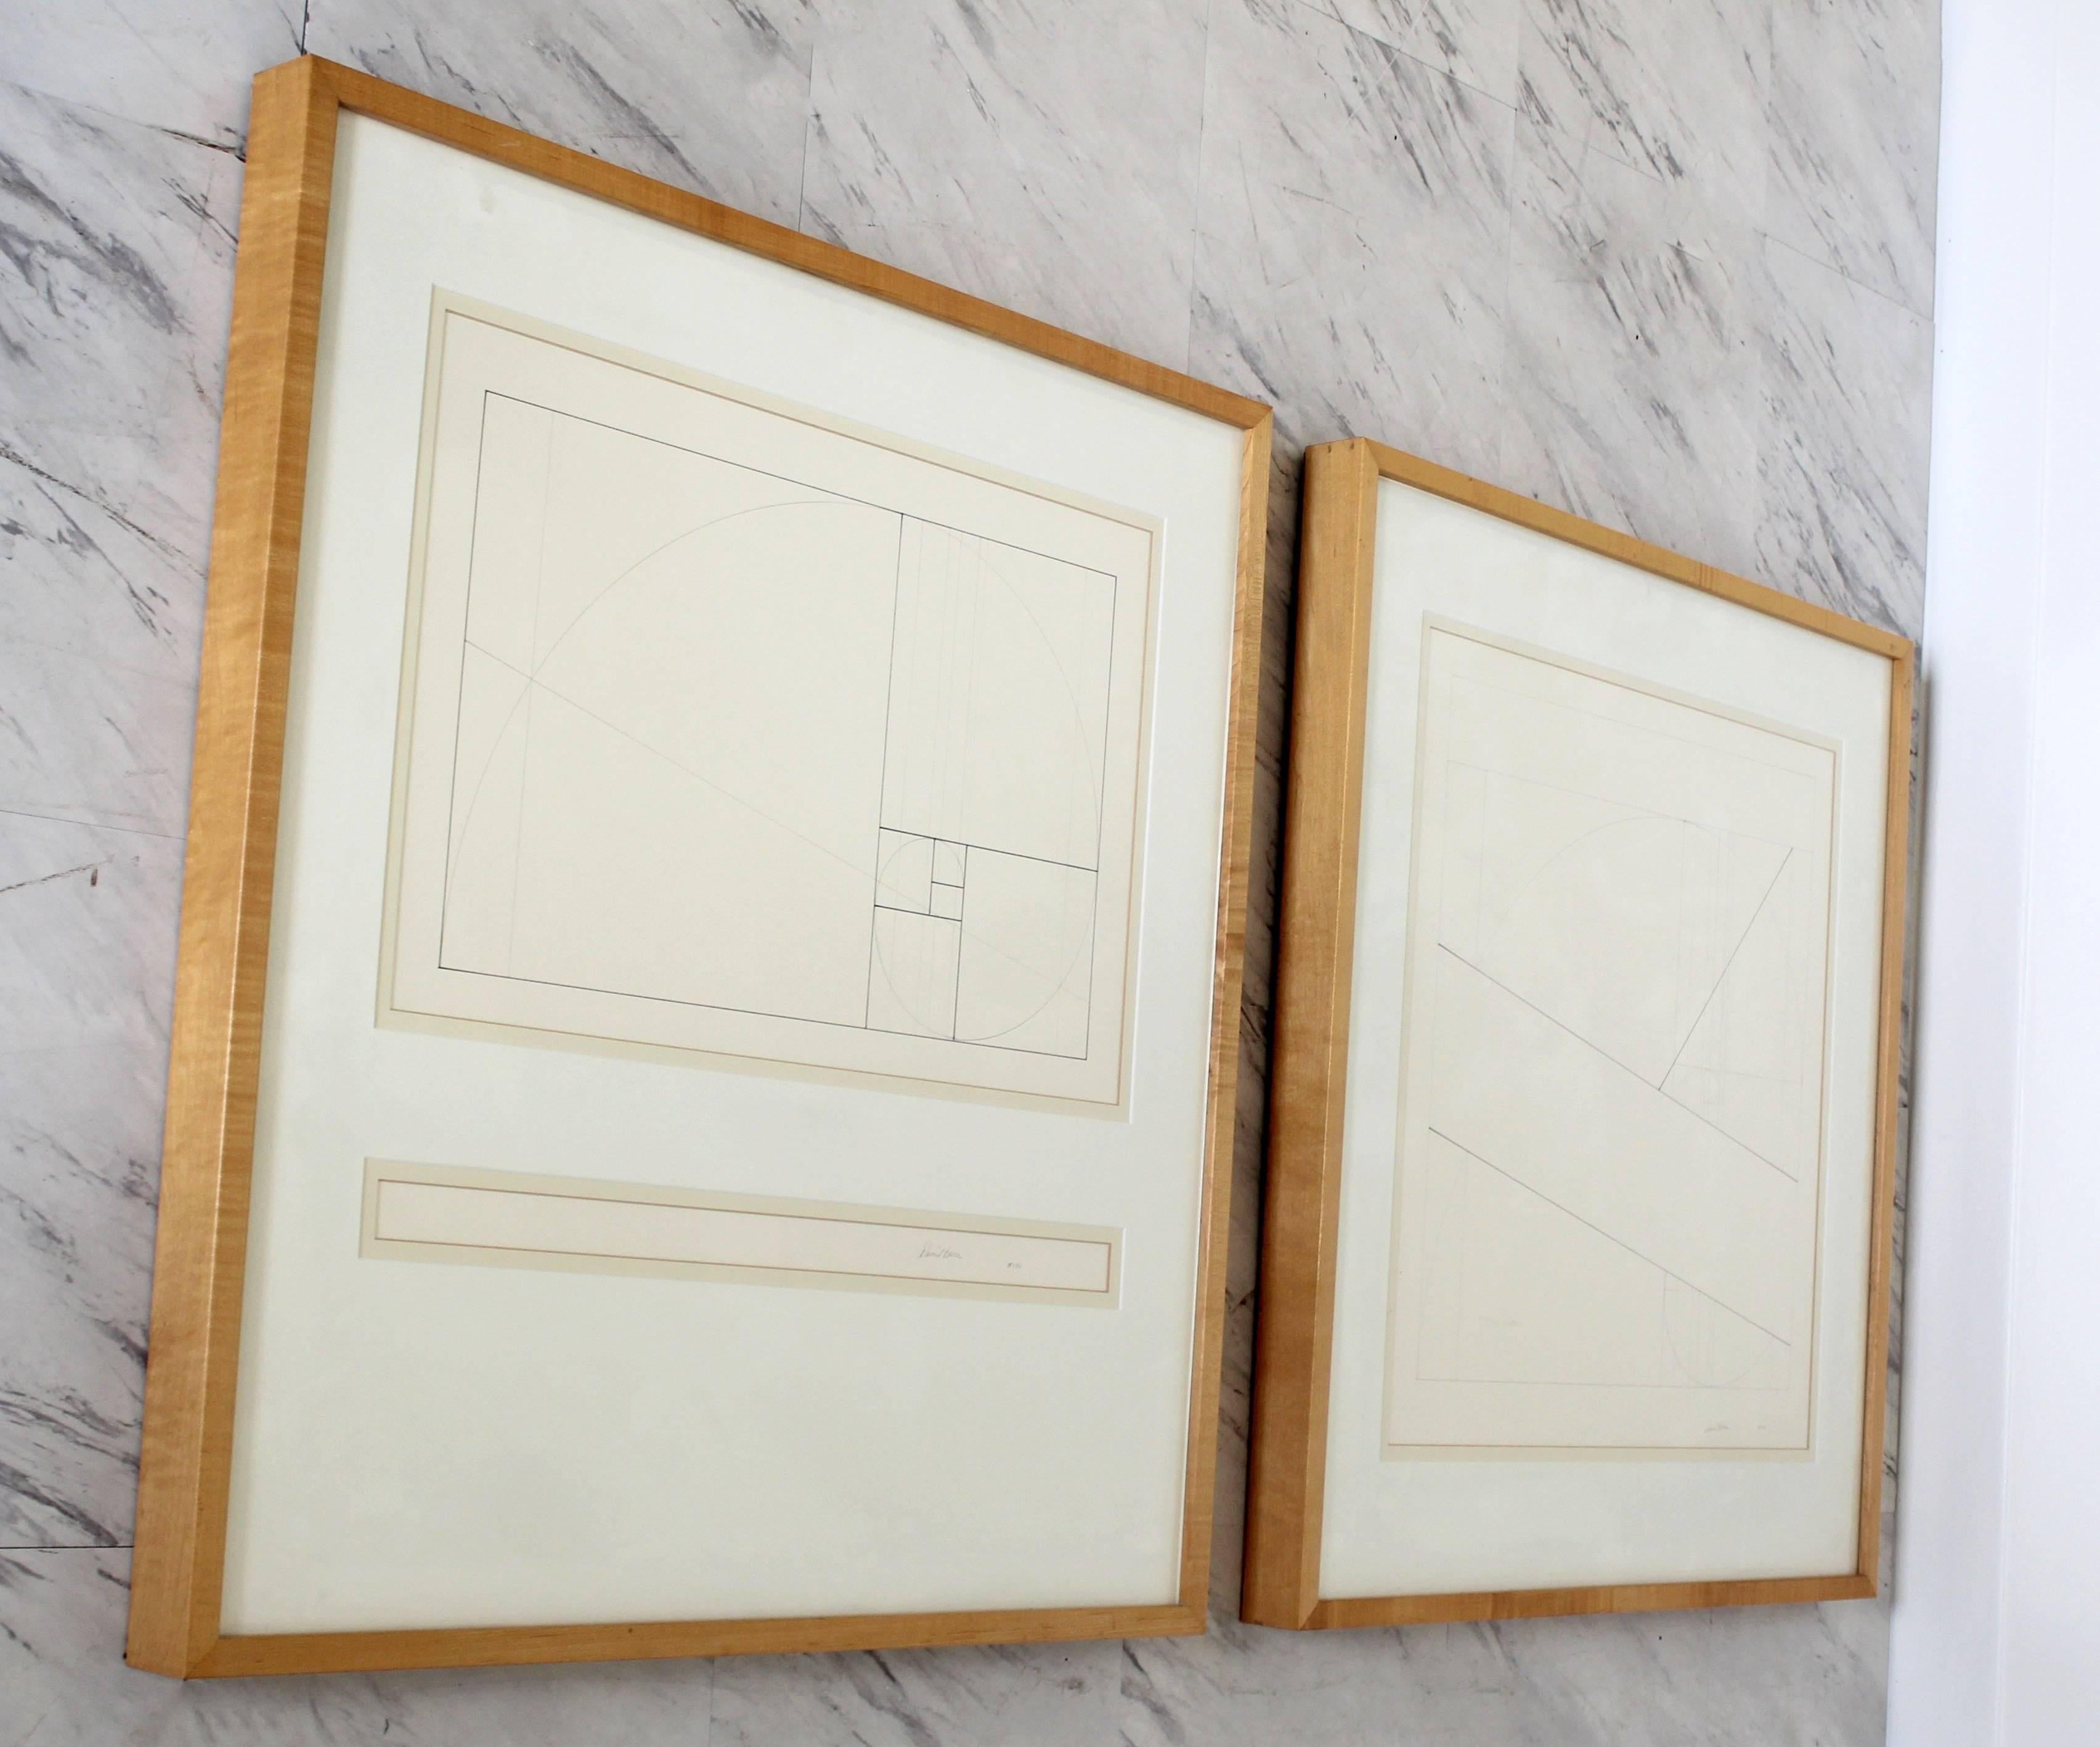 American Mid-Century Modern Framed Signed Set of Three Prints by David Barr 170 Geometry